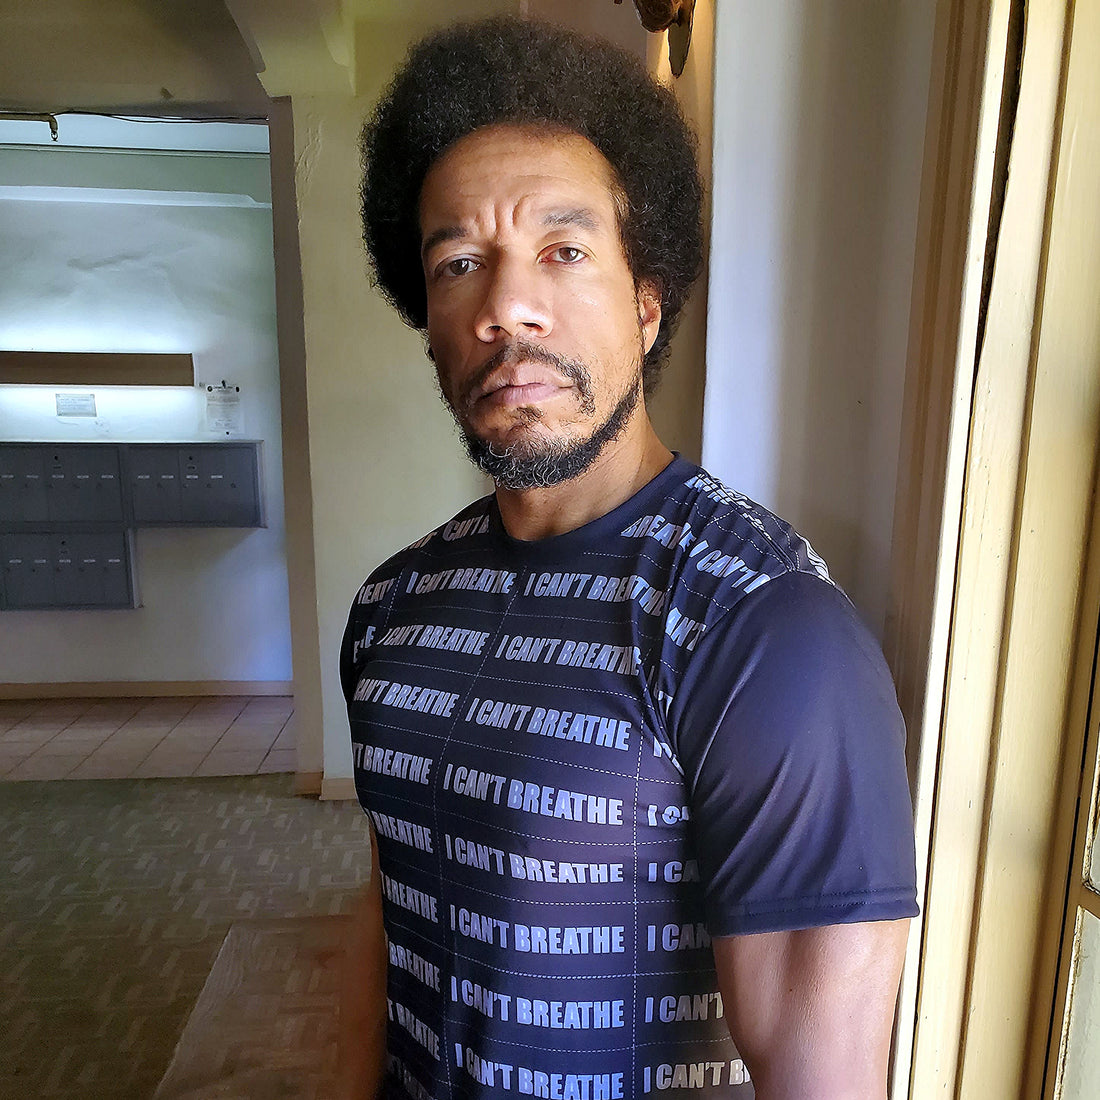 Actor + Activist, Rico E. Anderson Supporting the Movement Wearing his "I Can't Breathe" Tee